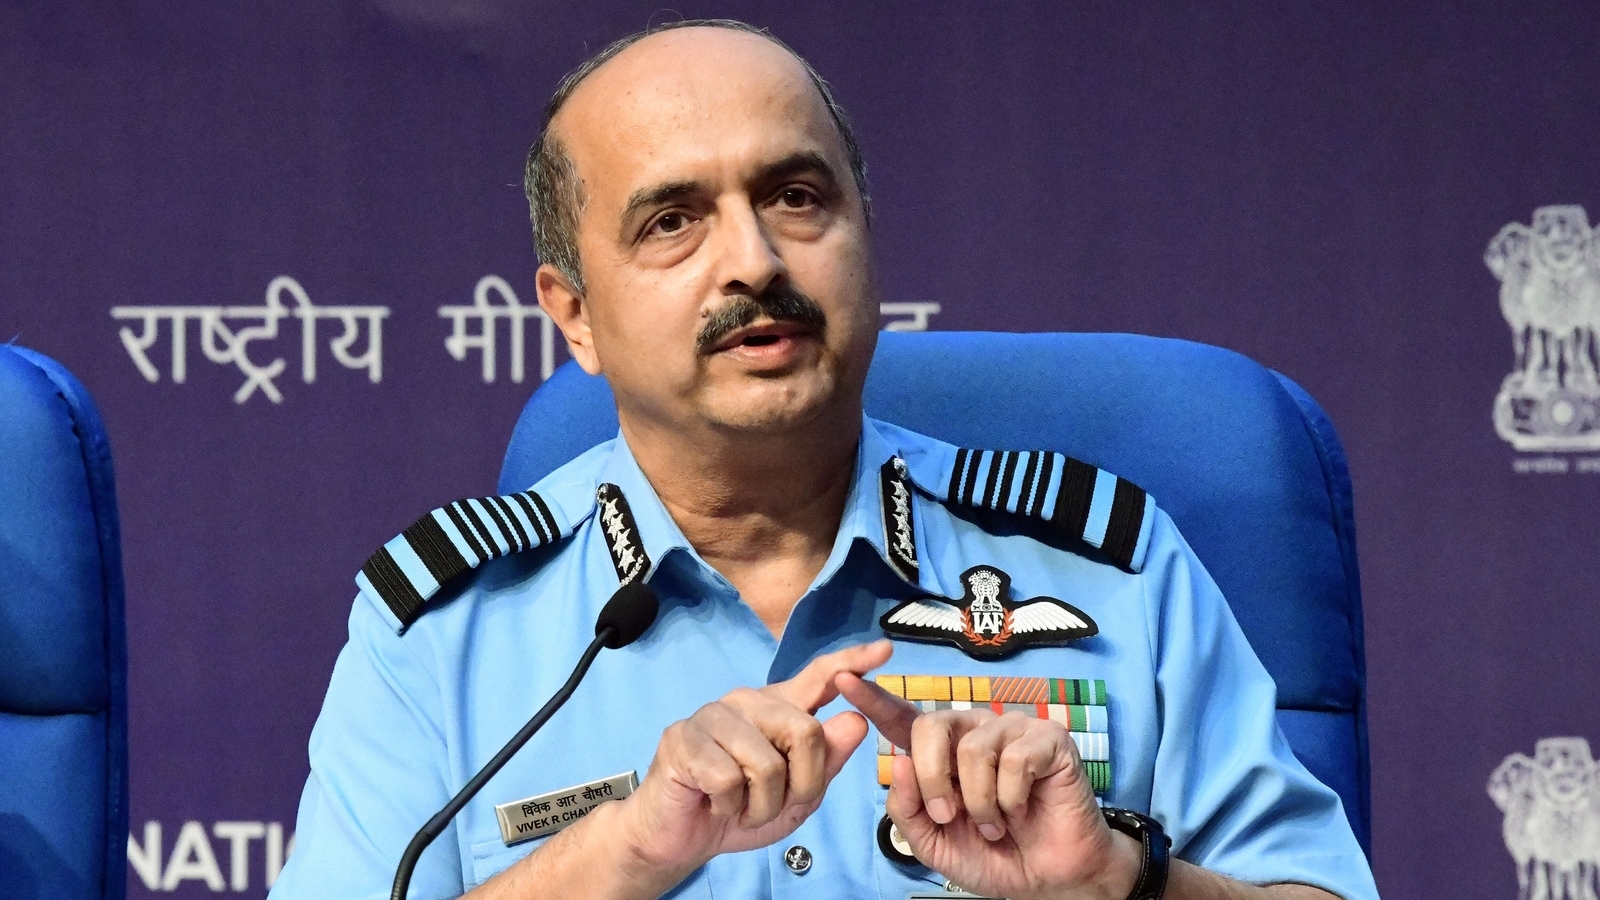 You are currently viewing Agnipath stir: IAF chief says violence no solution, asks youth to seek clarity | Latest News India